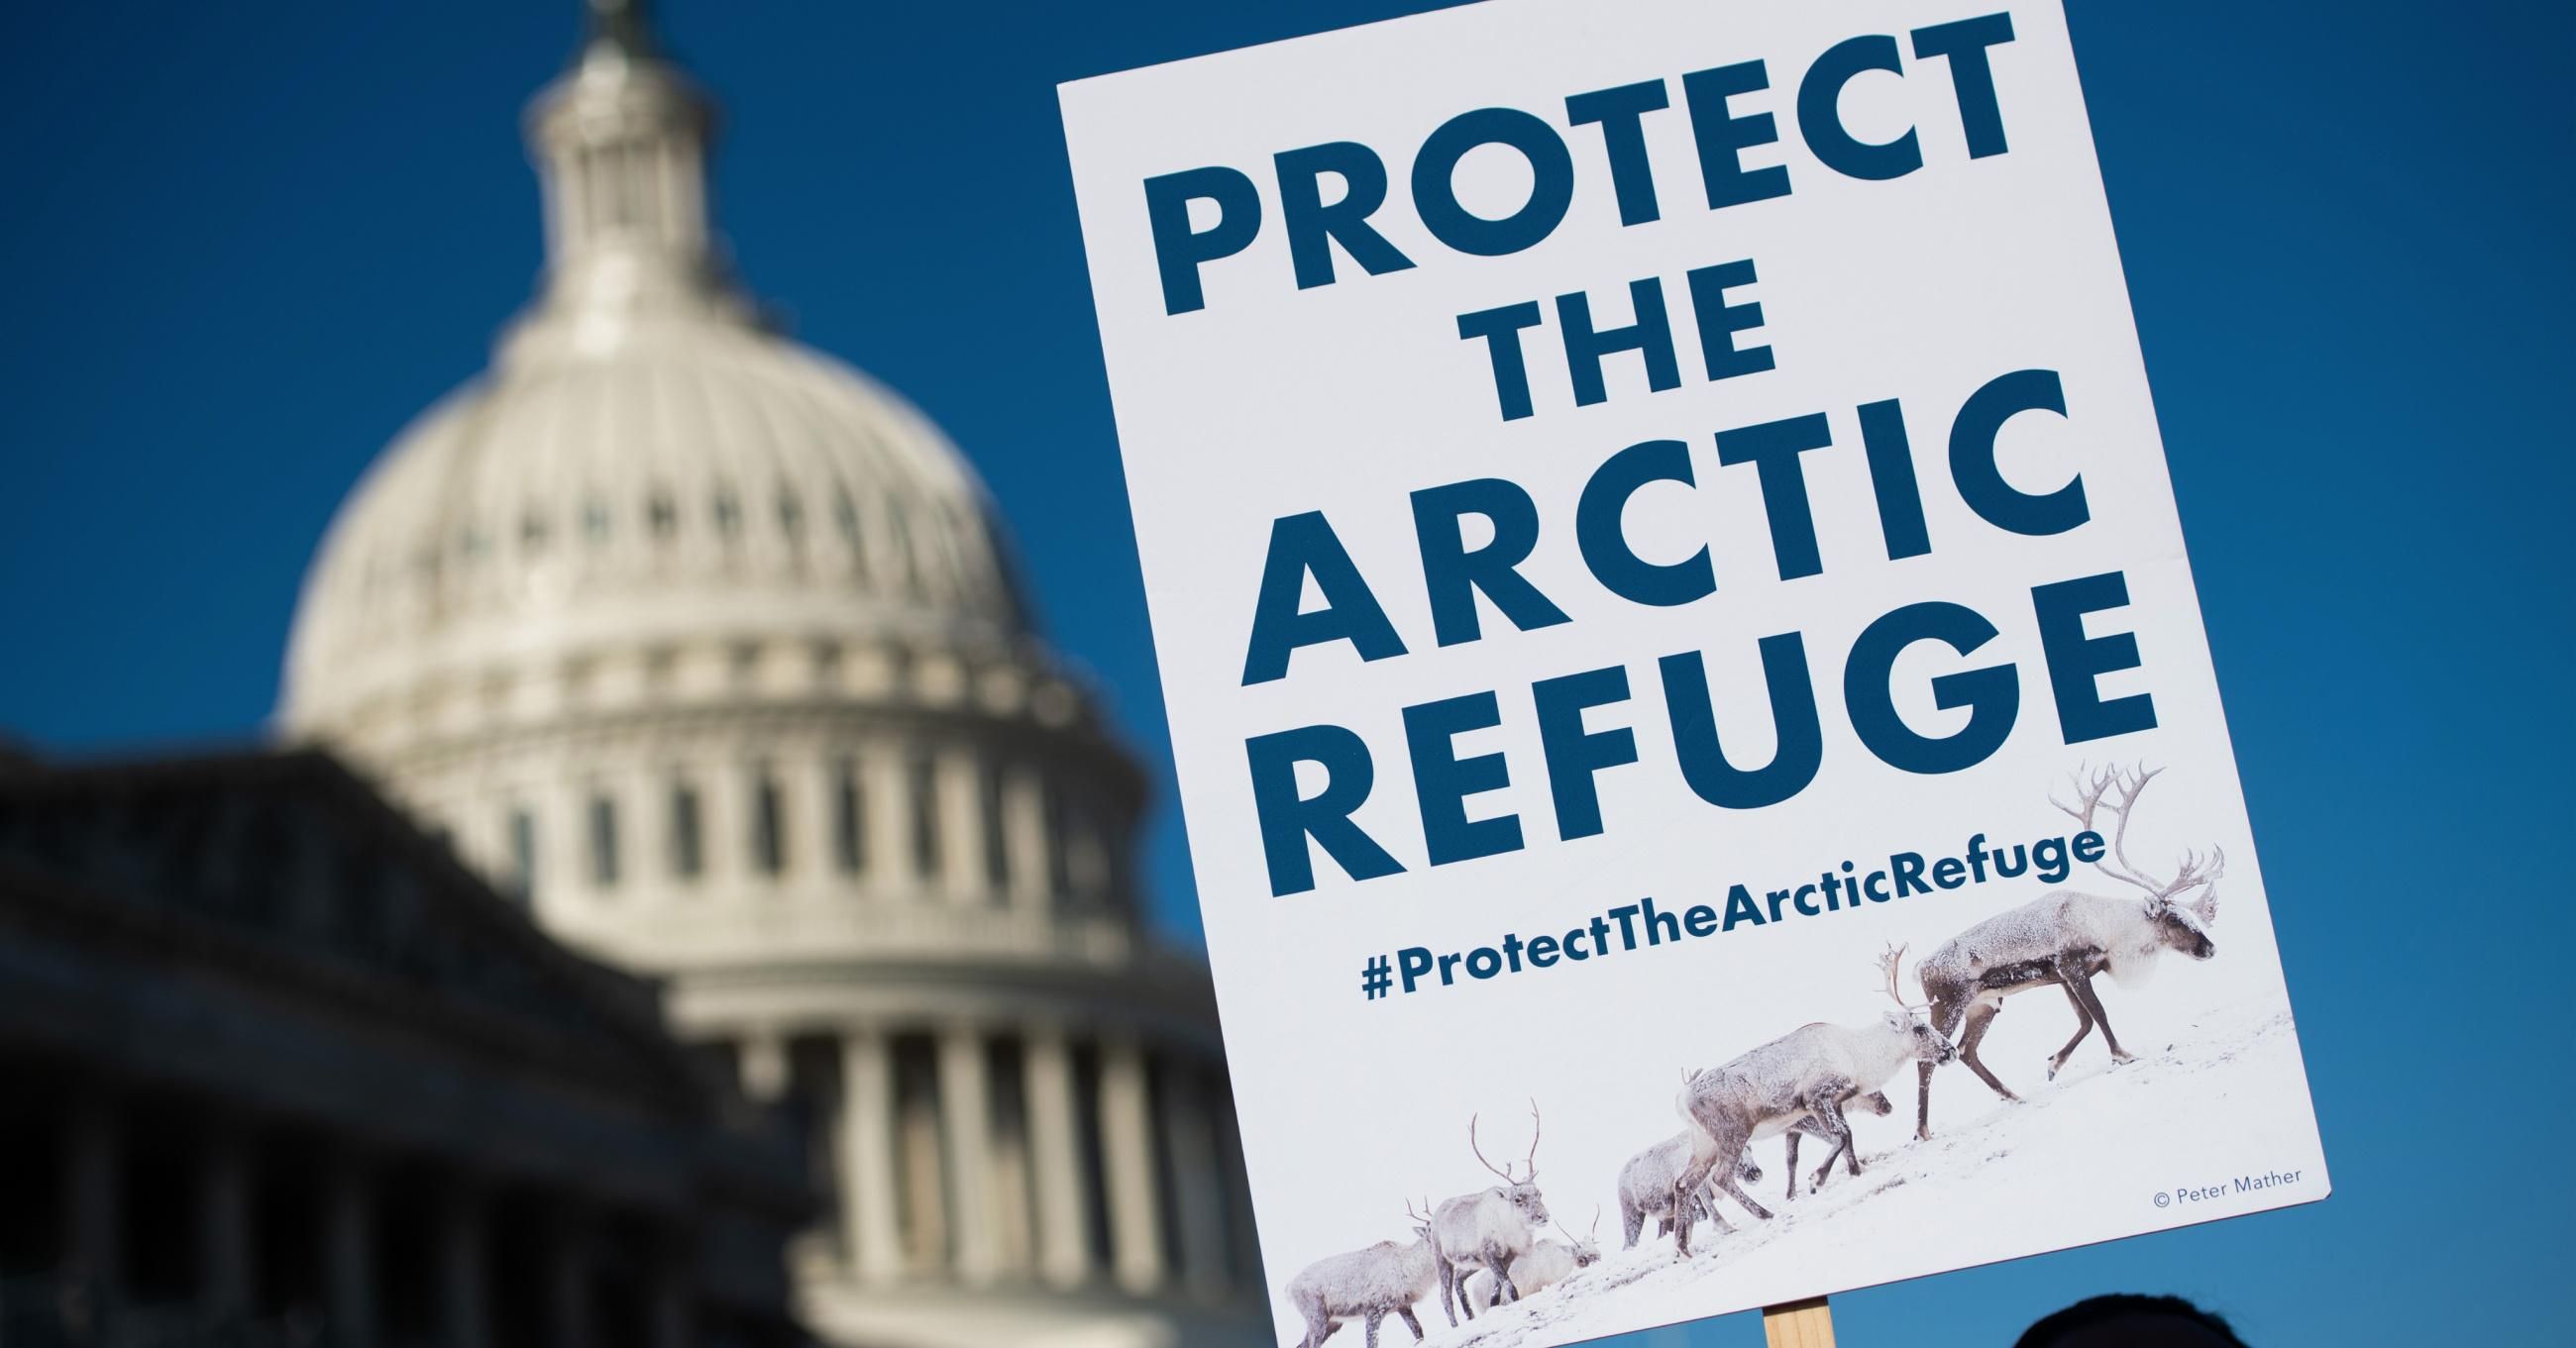 A demonstrator holds a sign against drilling in the Arctic National Wildlife Refuge during a press conference outside the U.S. Capitol in Washington, D.C., on December 11, 2018. (Photo: Saul Loeb//AFP via Getty Images)